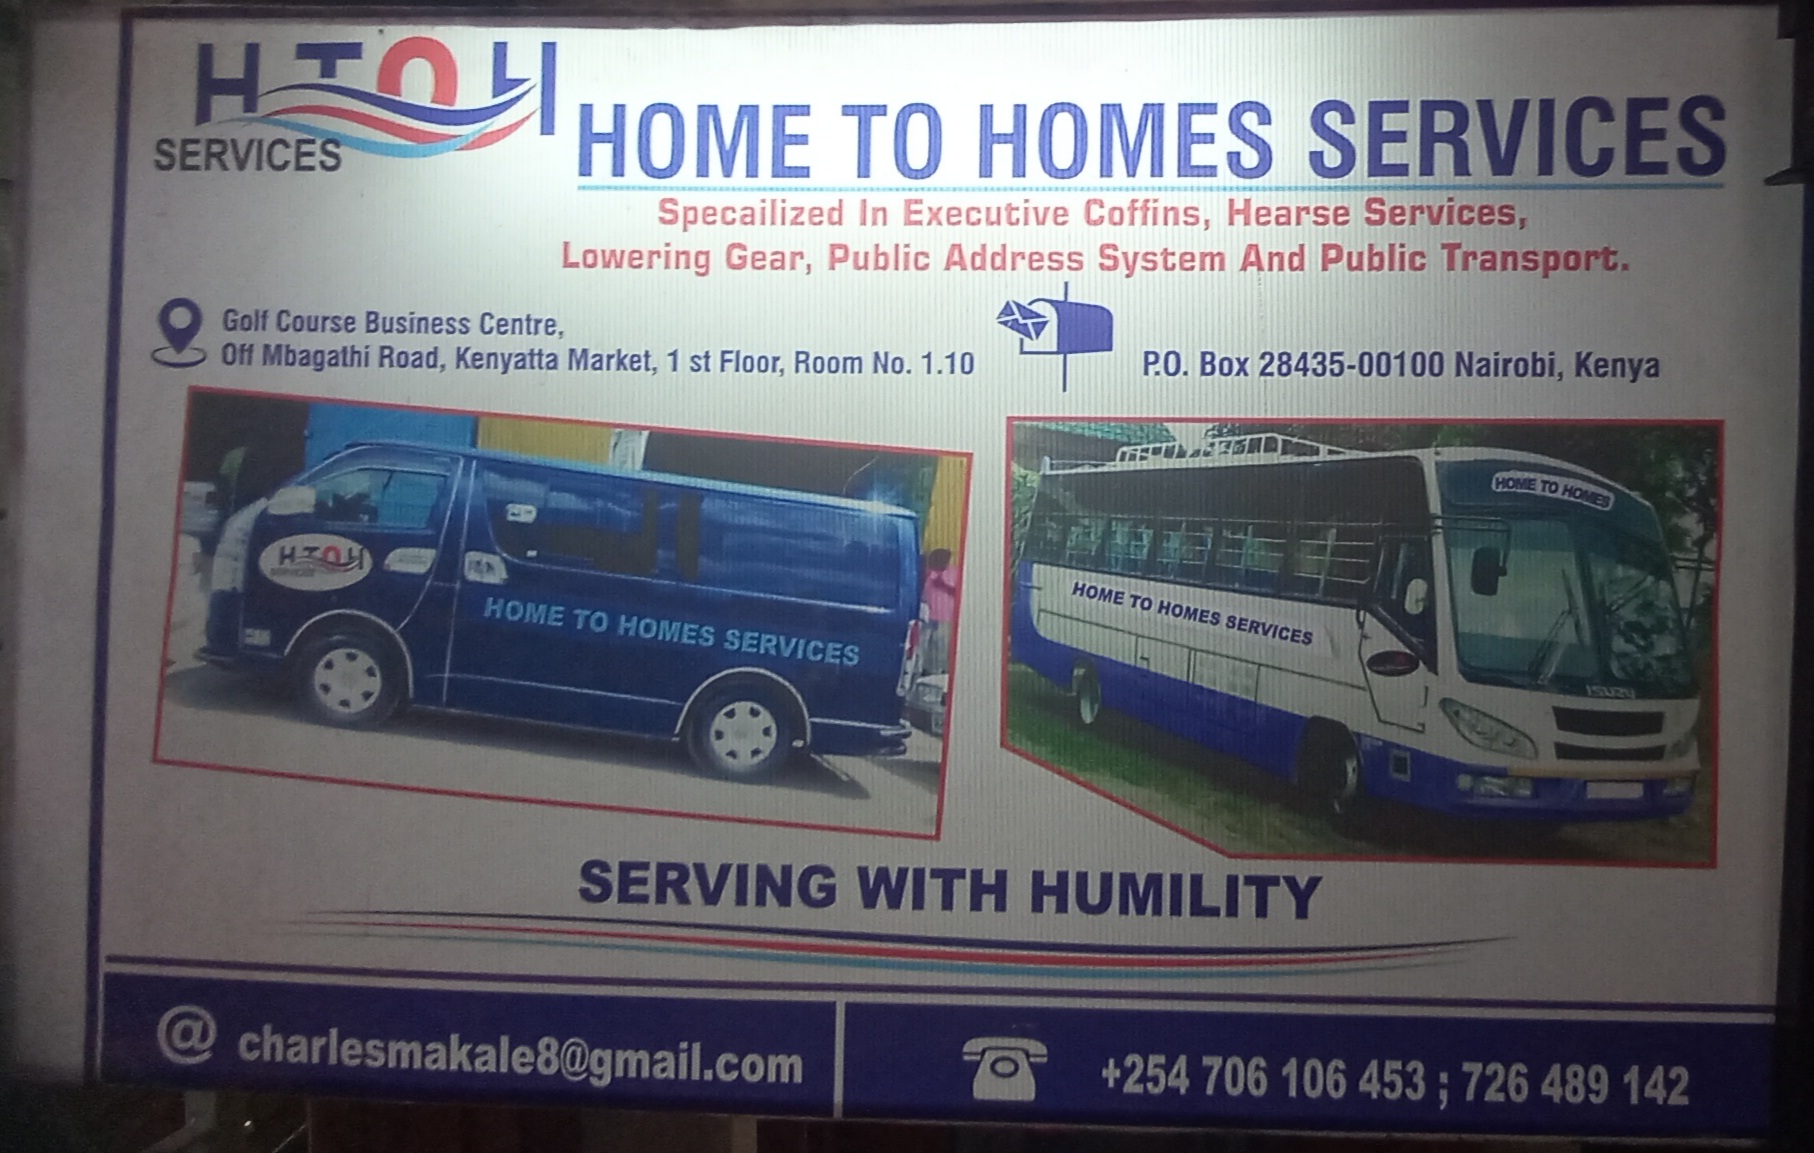 Home and Homes Services